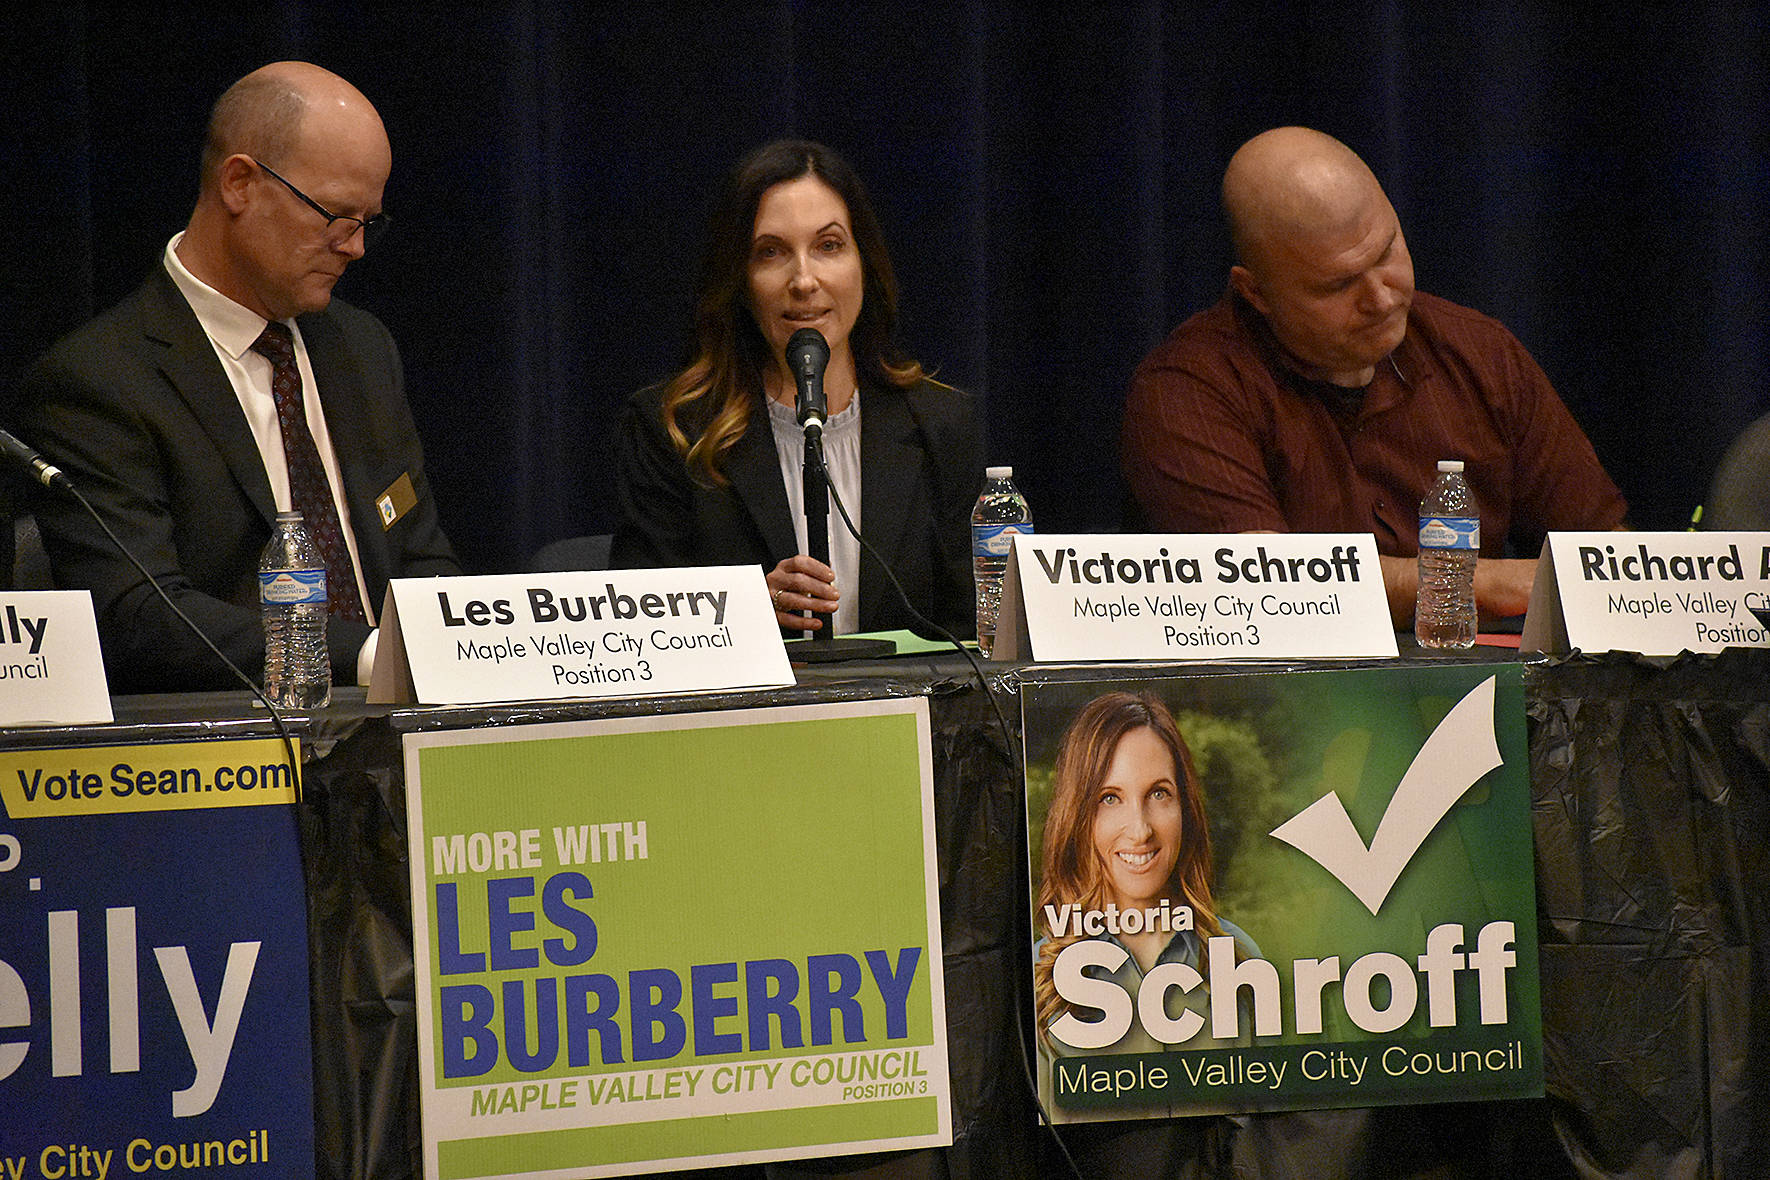 Photo by Haley Ausbun. Position 3 candidates Les Burberry and Victoria Schroff and position 5 candidate Richard Axtell.